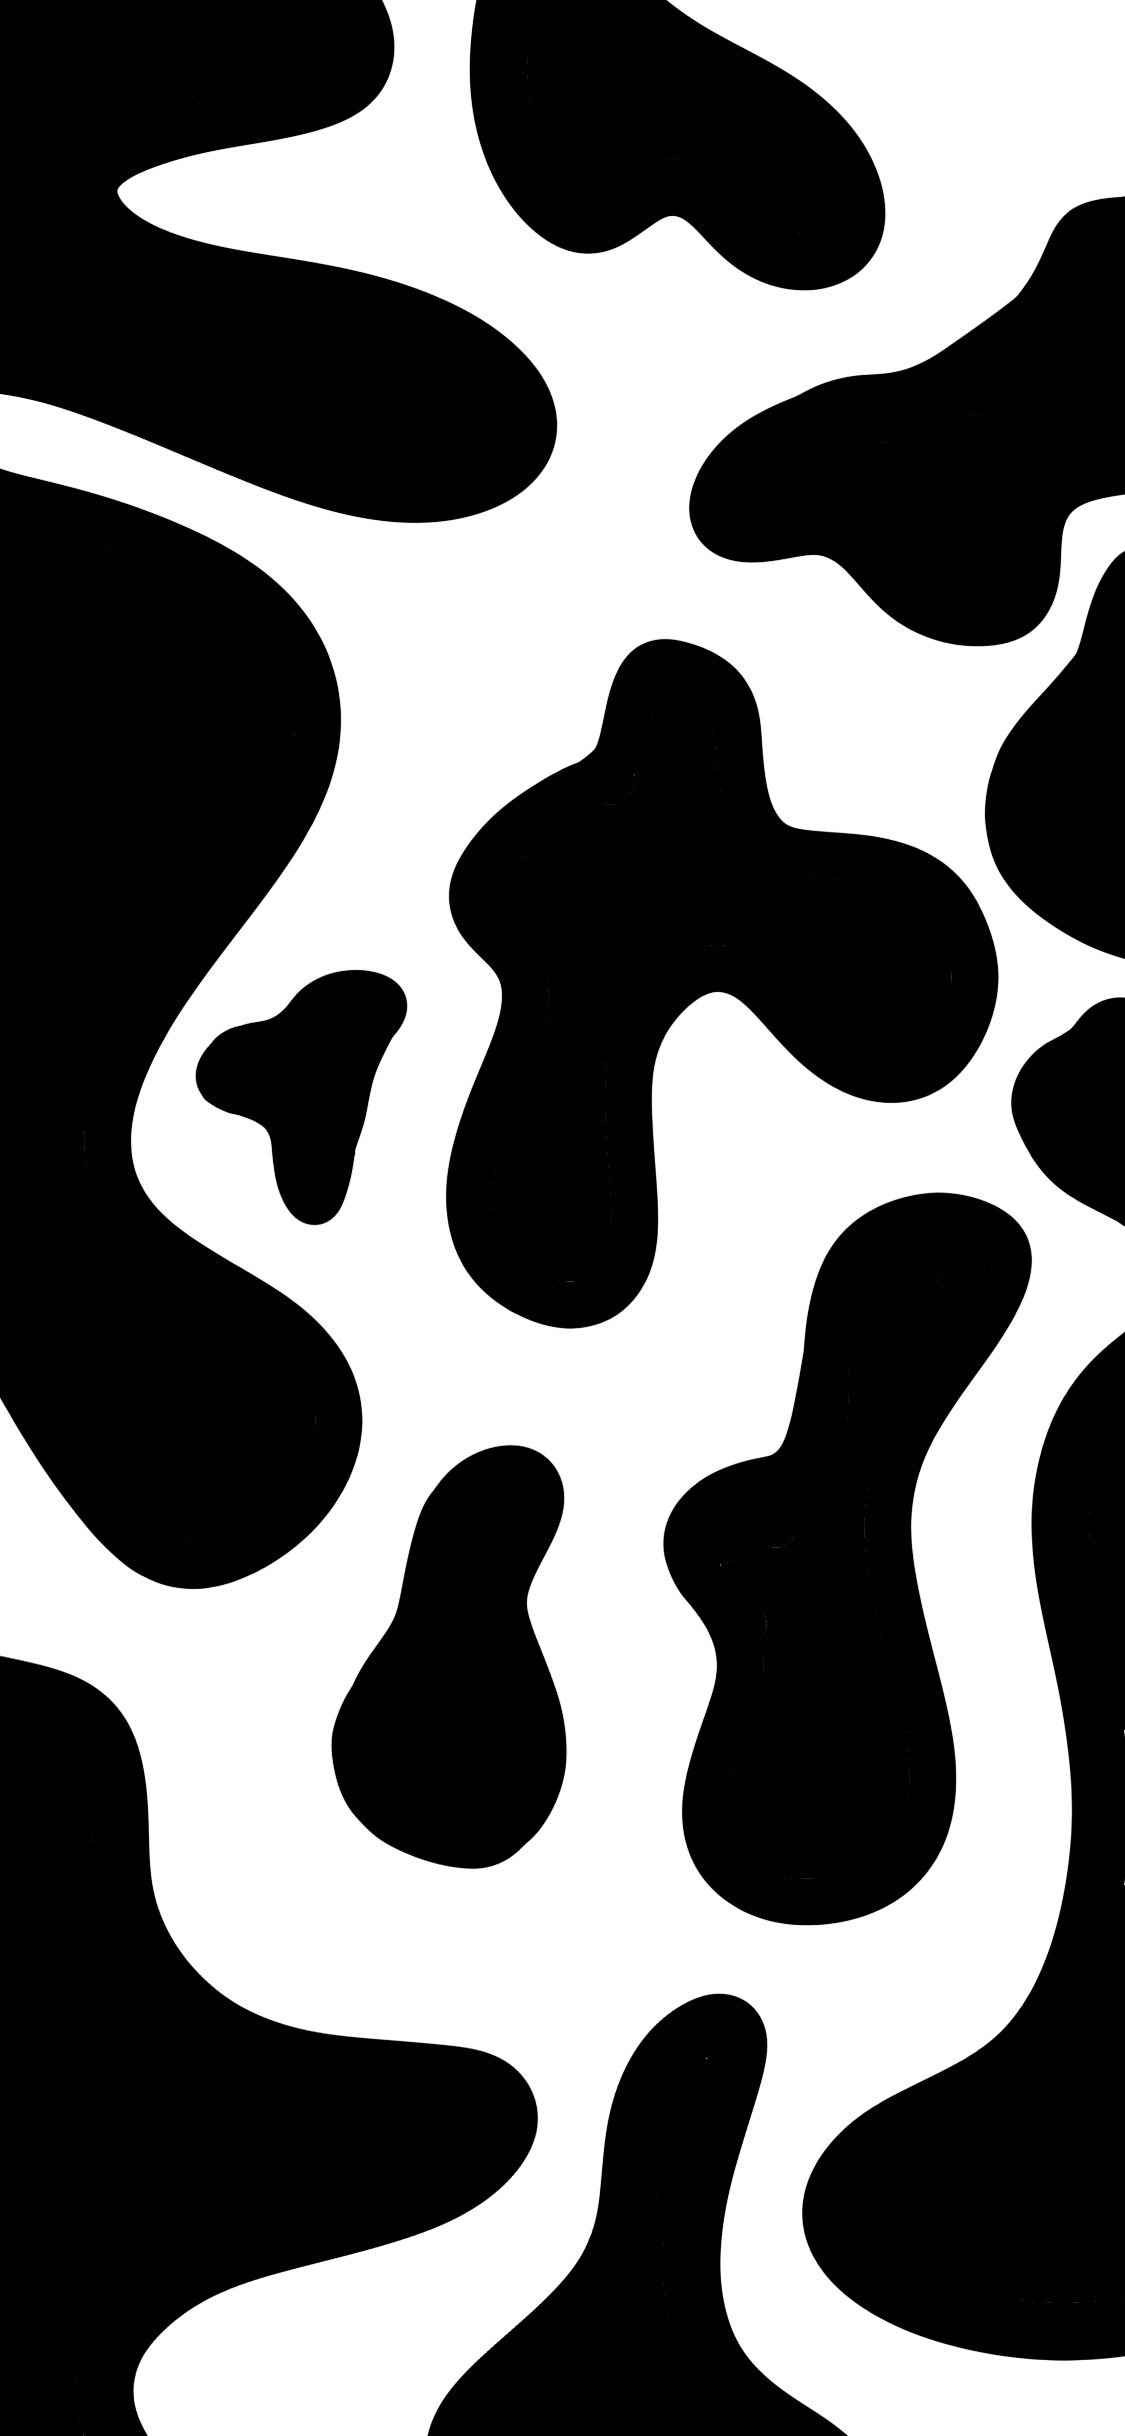 Wallpaper cow print aesthetic background animal print black and white iPhone. Картинки подсолнечника, Заставка искры, Розовые фоны